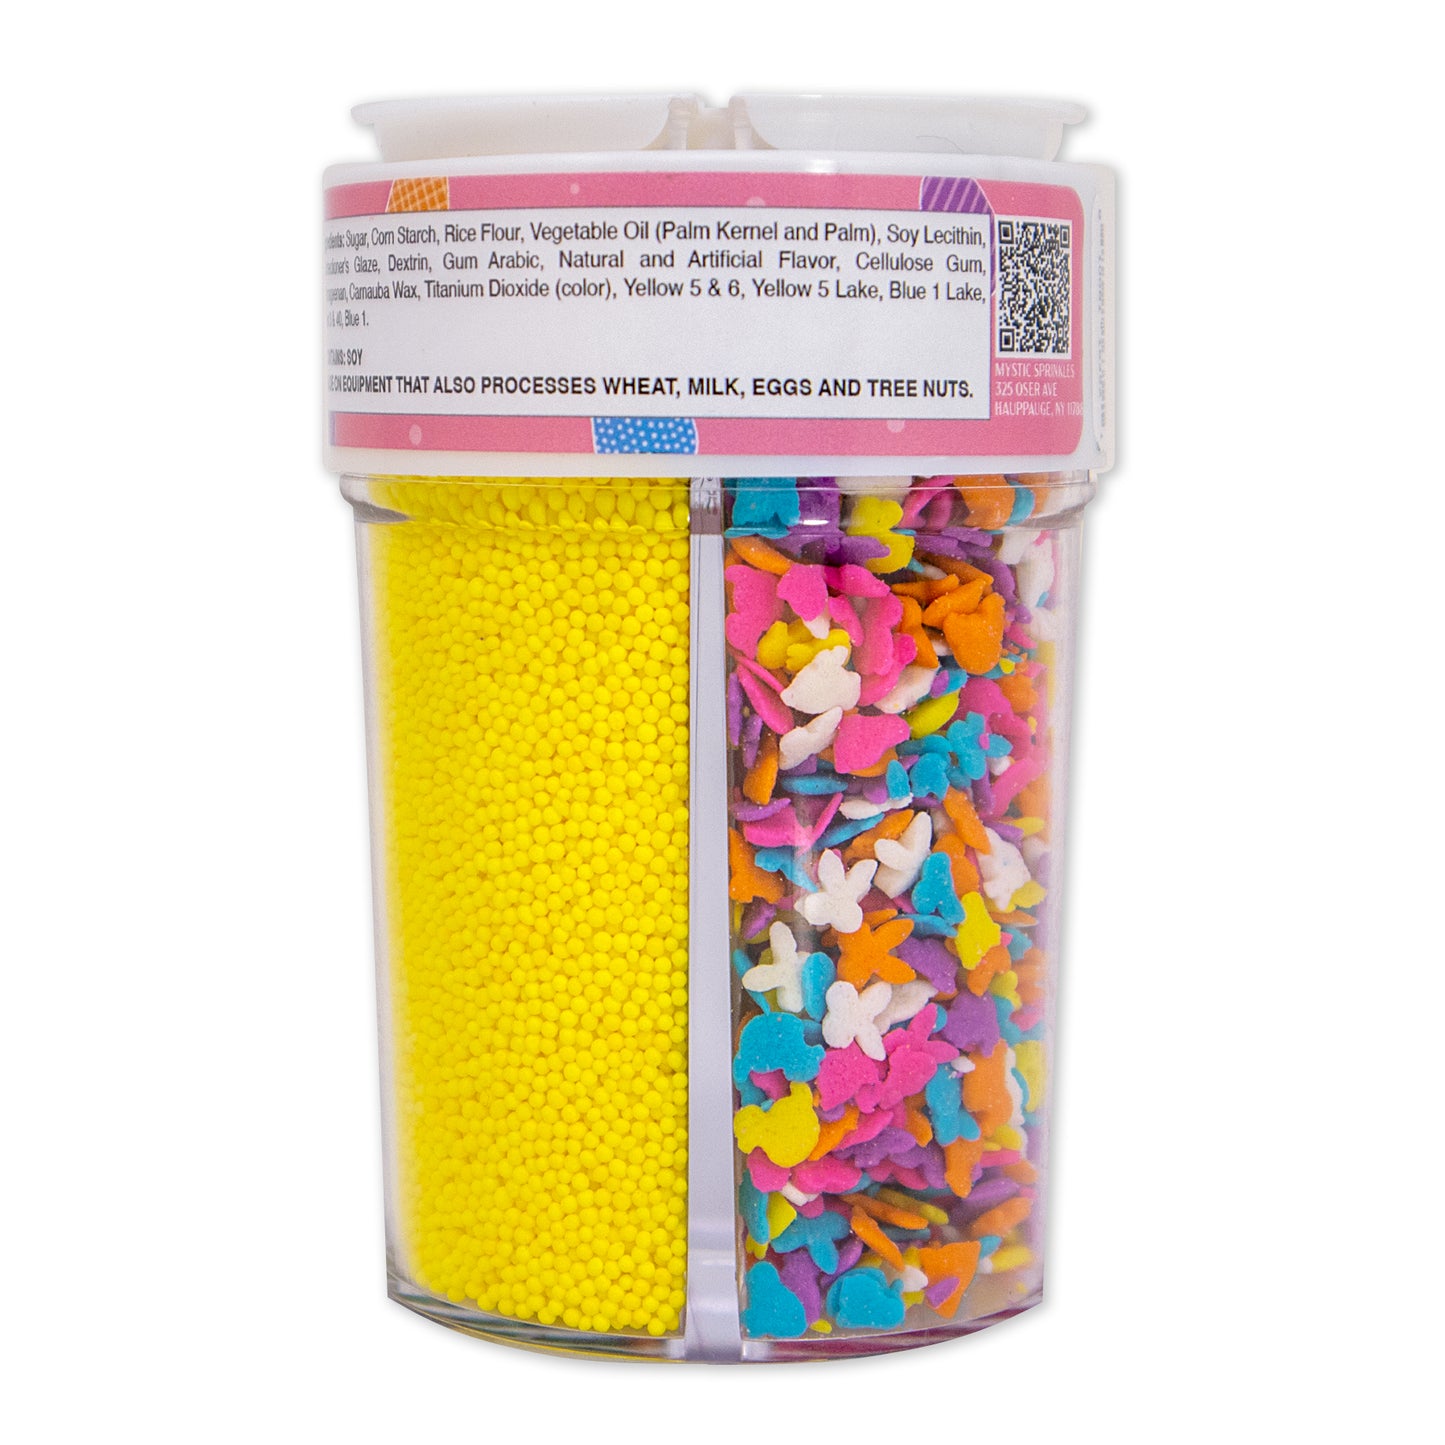 Load image into Gallery viewer, Egg Hunt Midi Sprinkle Assortment 5.3oz
